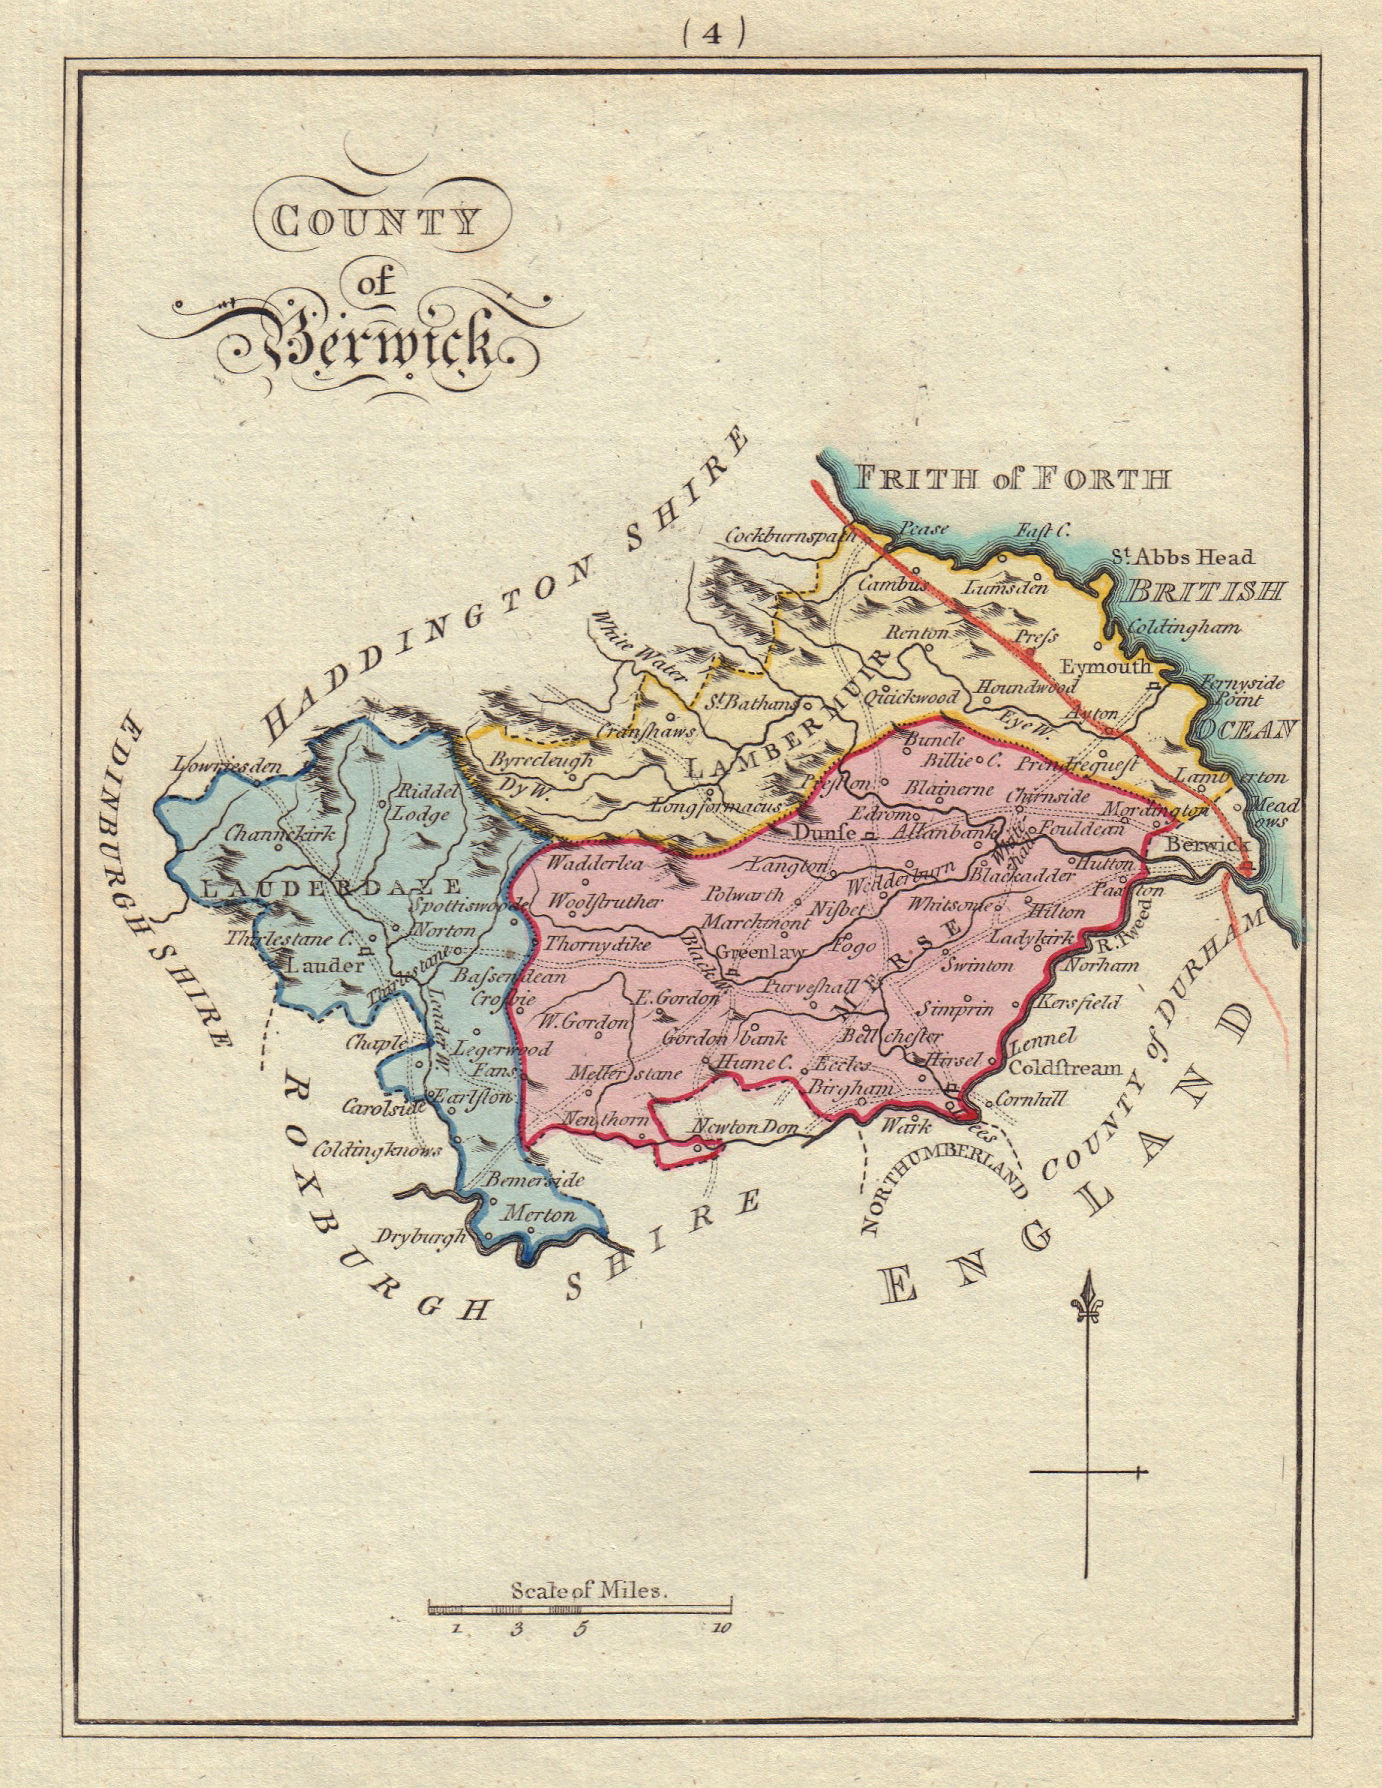 Associate Product County of Berwick. Berwickshire. SAYER / ARMSTRONG 1794 old antique map chart